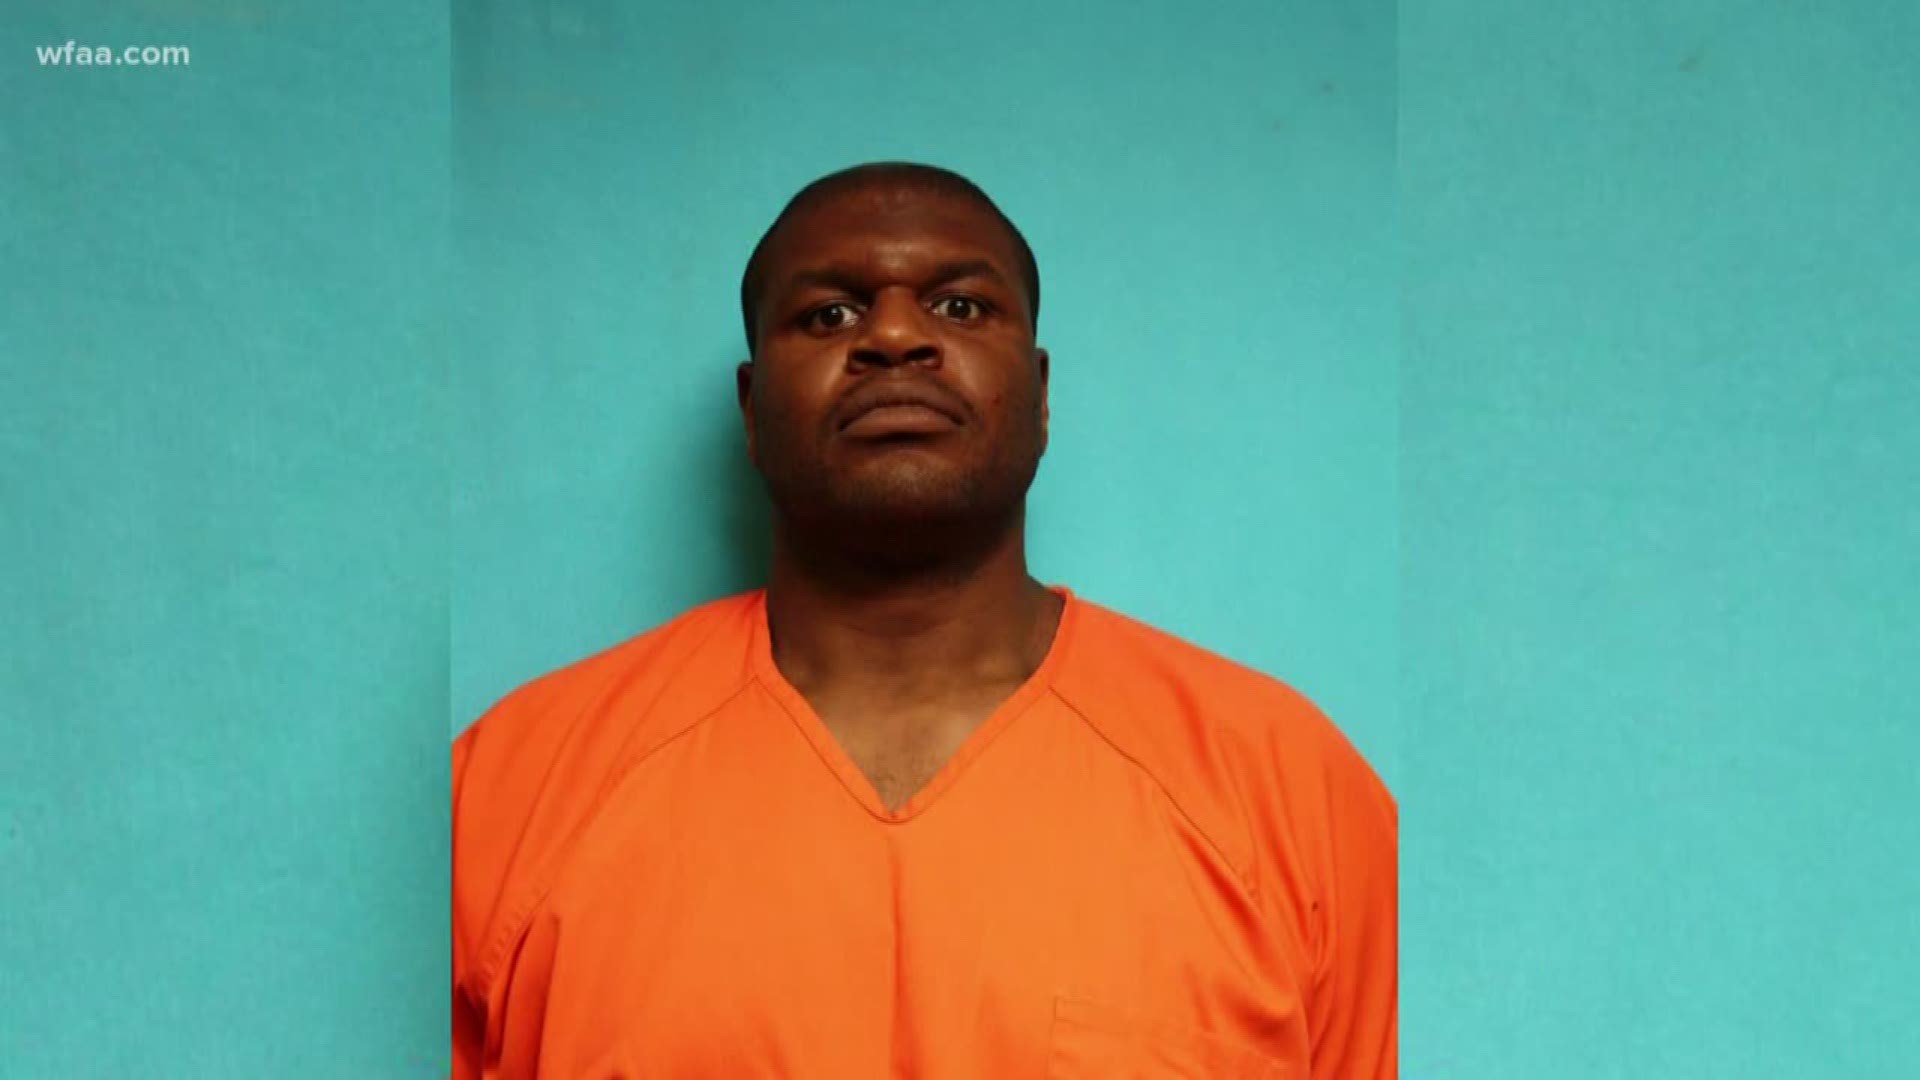 Former Dallas Cowboy defensive tackle Josh Brent was arrested for public intoxication and resisting arrest and was tased by Coppell police Sunday.